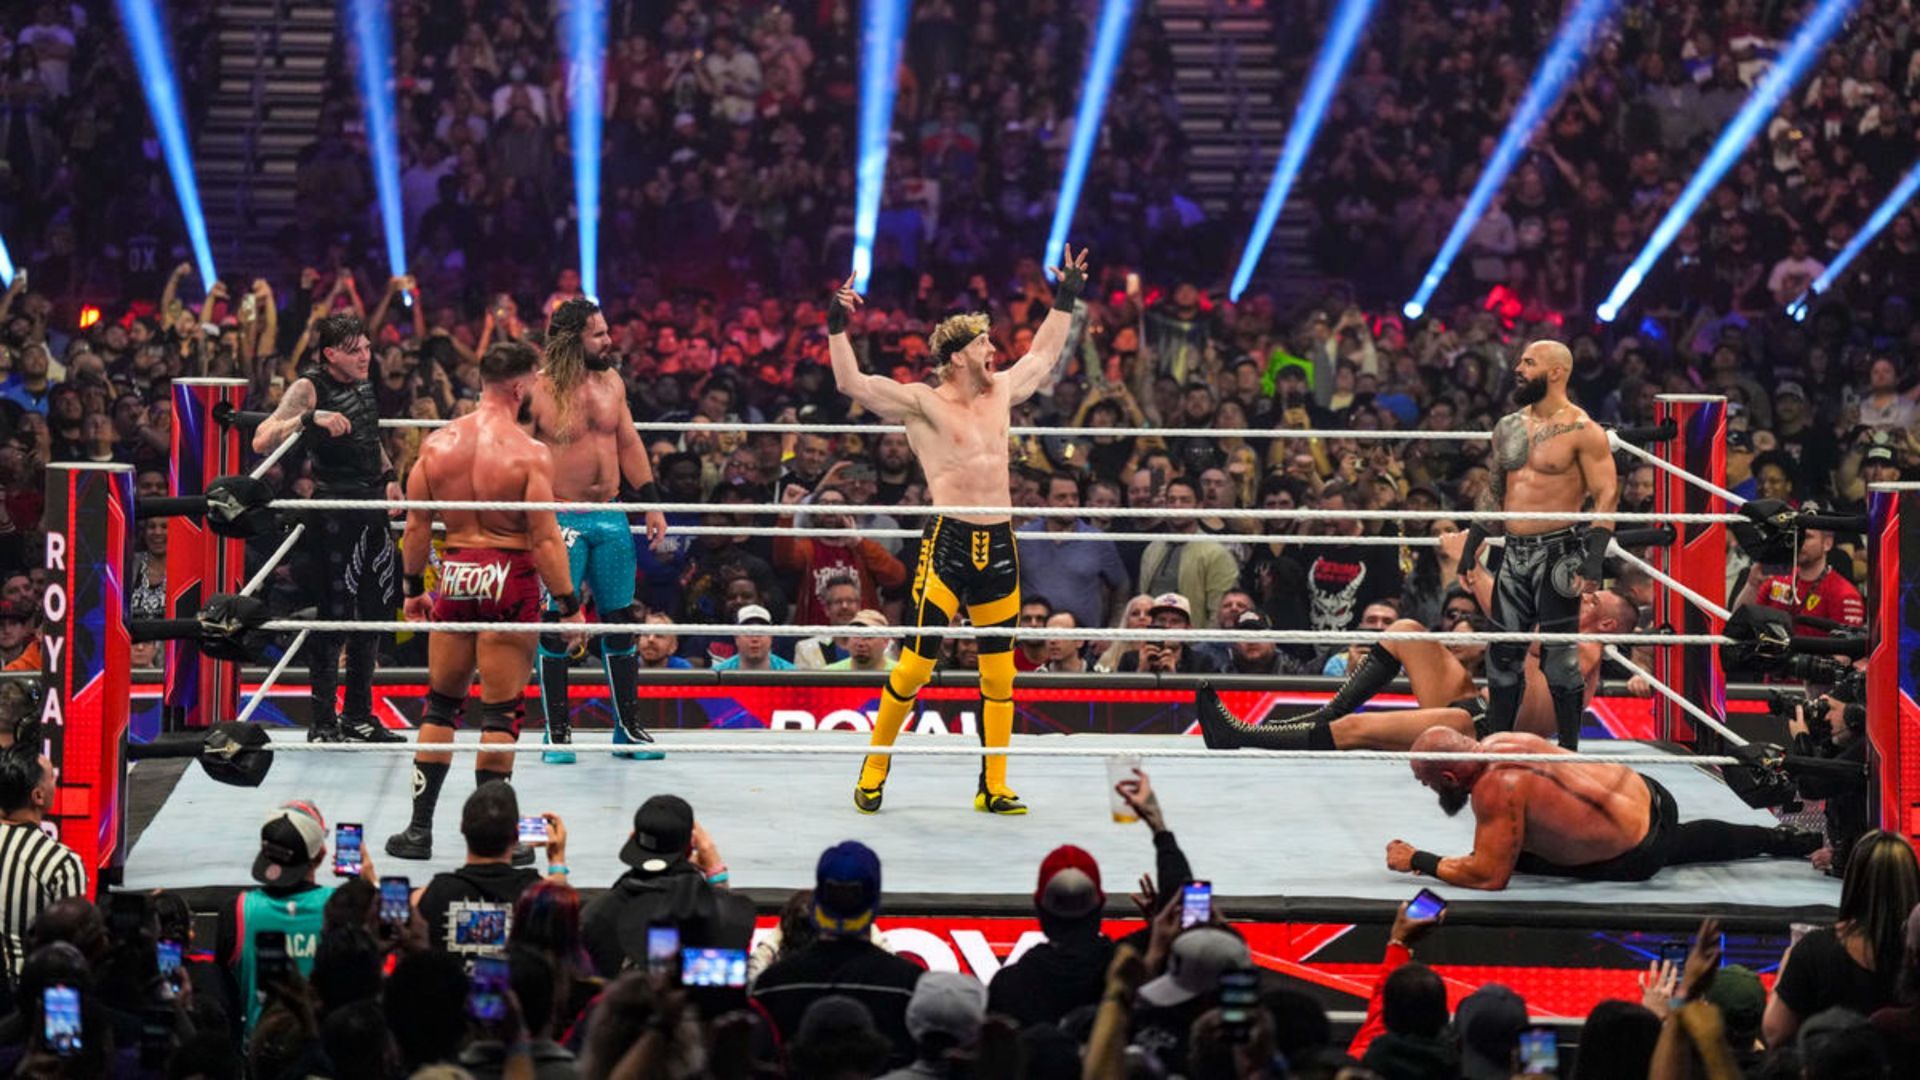 Logan Paul competed in the 2023 WWE Men